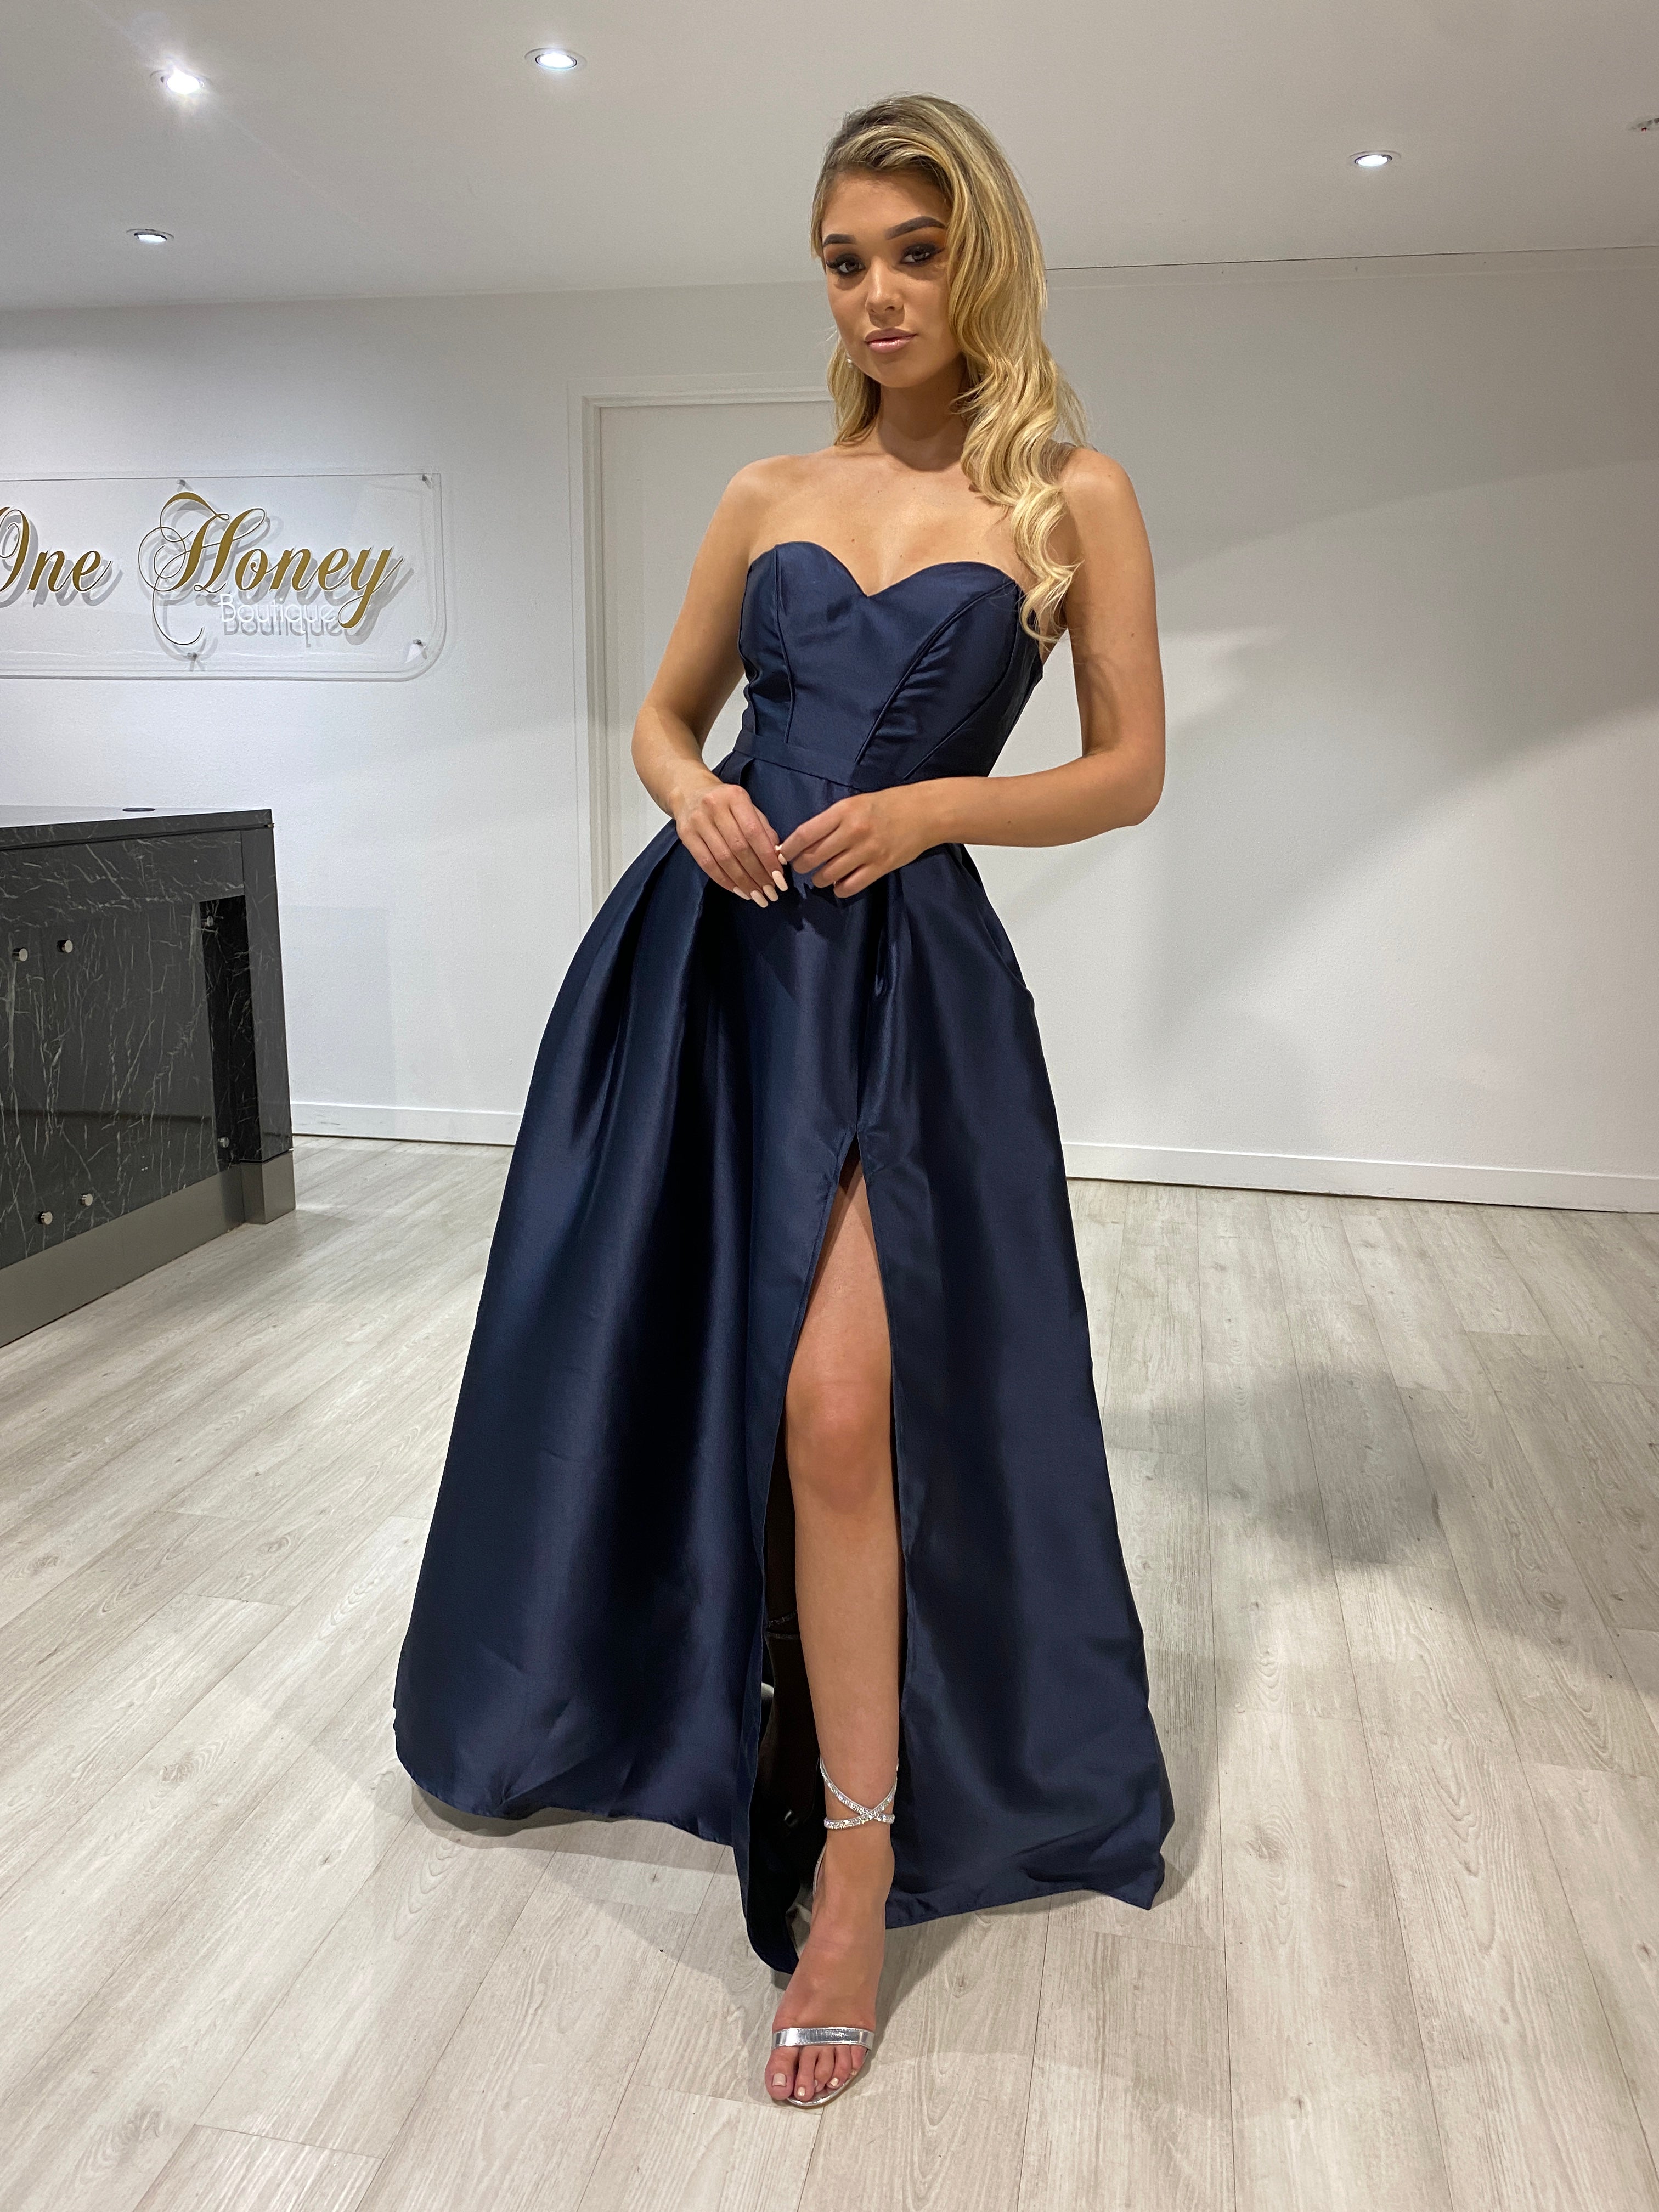 Honey Couture MAGDELINA Navy Blue Strapless Ballgown Formal Dress